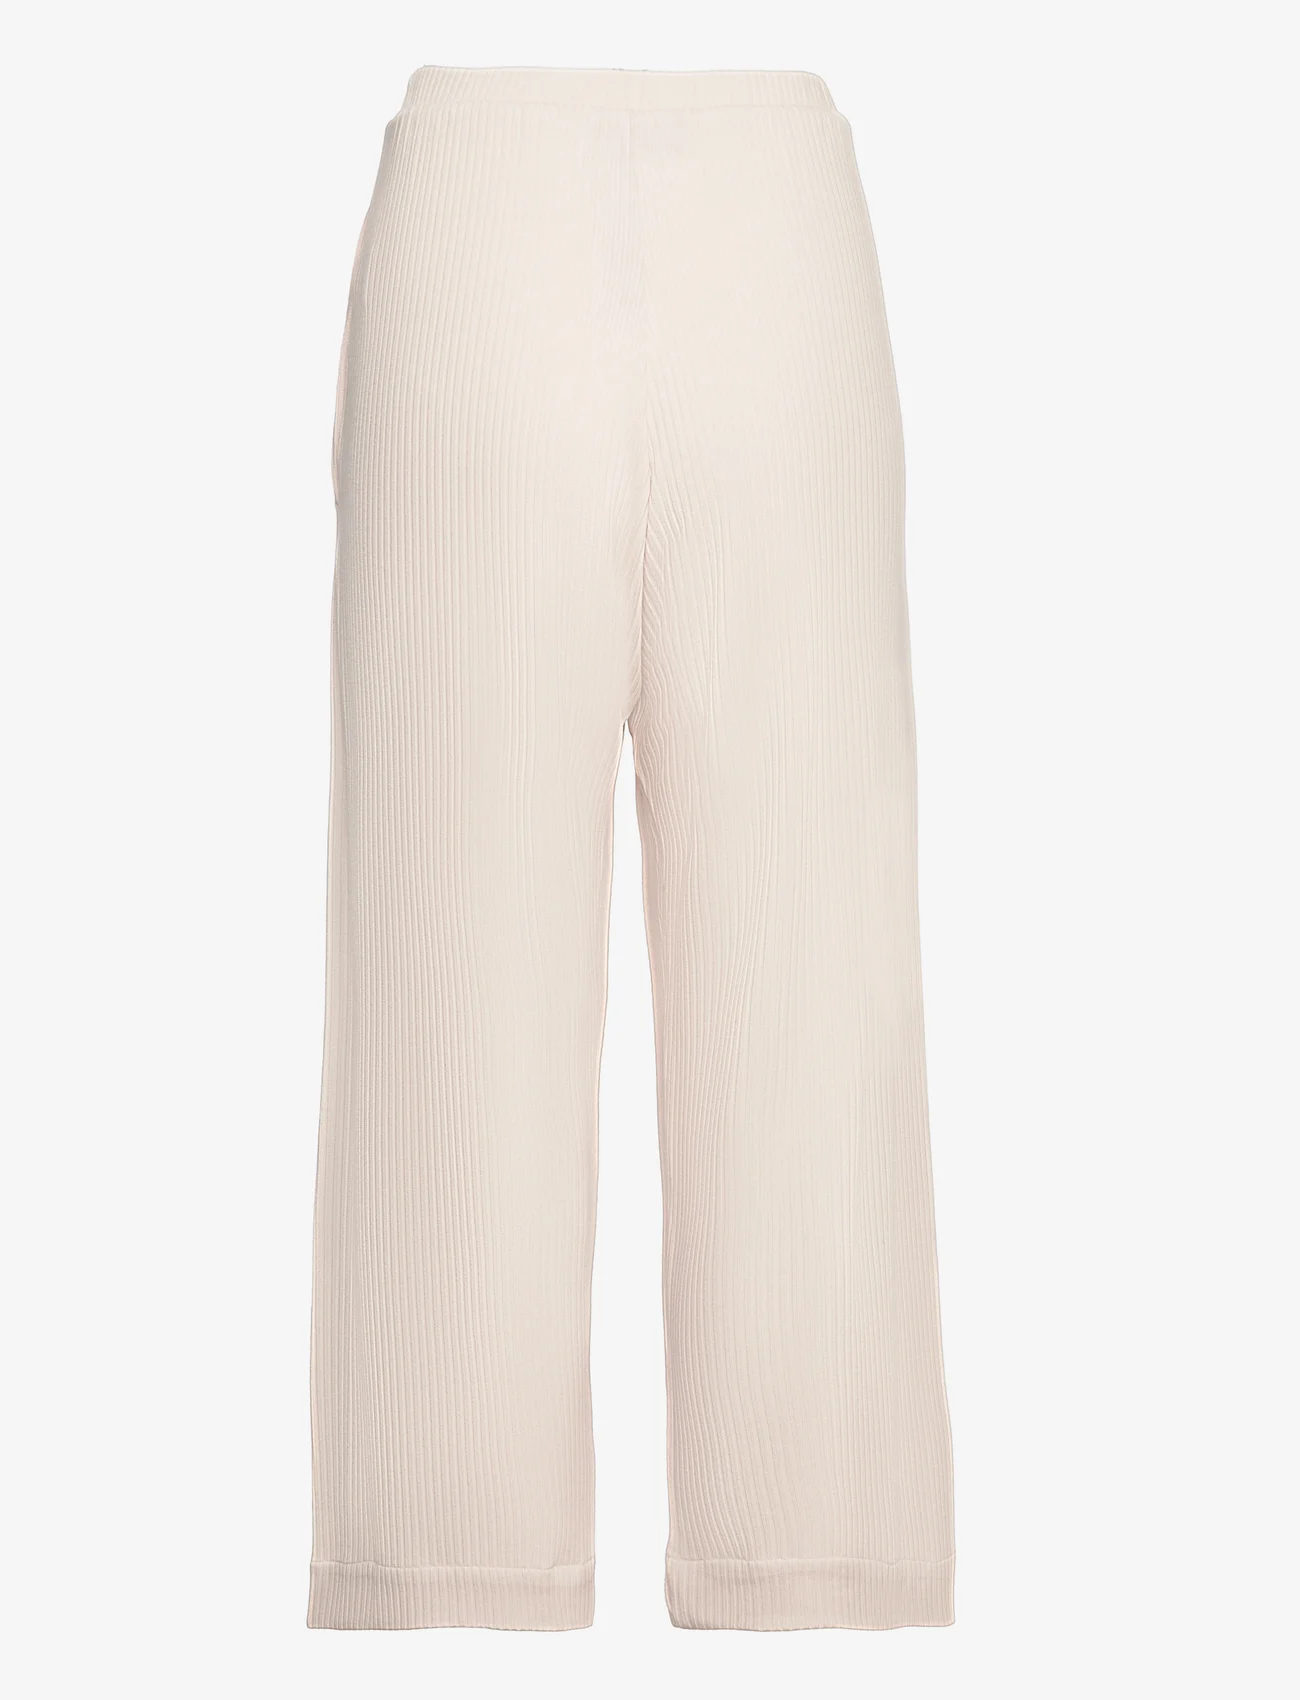 A Part Of The Art - AIRY PANTS - joggersit - ivory - 1